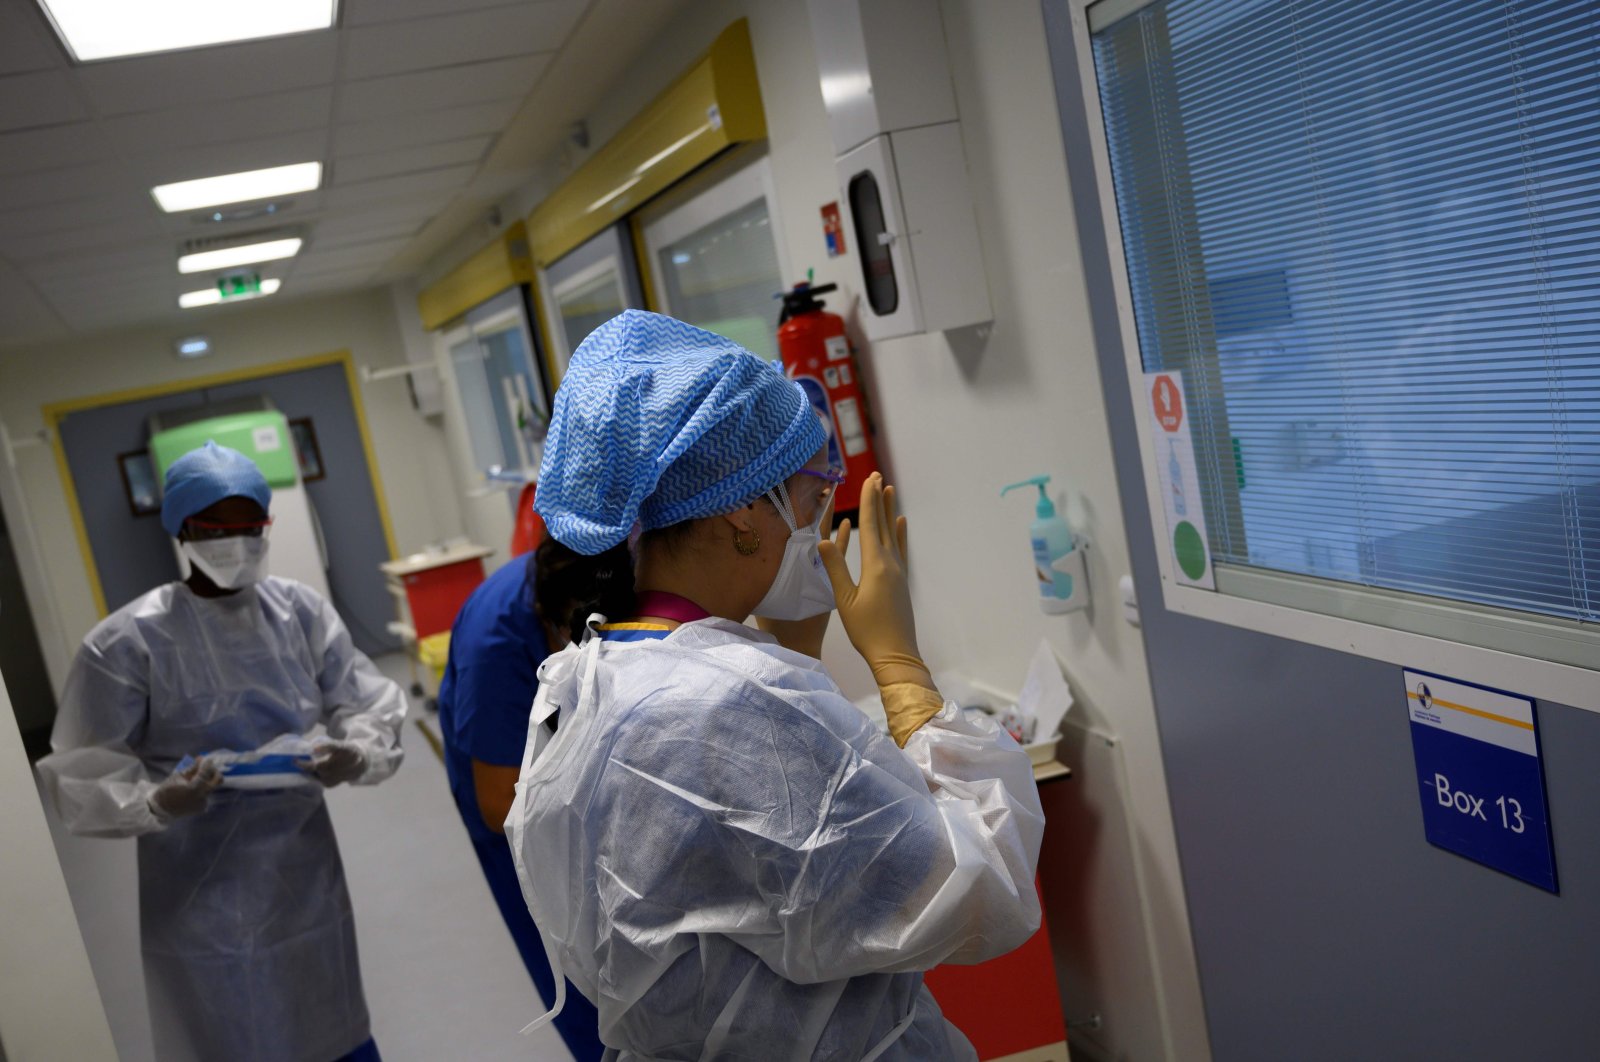 A Nurse gets ready to enter a room where a patient suffering from COVID-19 is hospitalized at the emergency unit of La Timone hospital in Marseille, southeastern France, on Sept. 11, 2020. (AFP Photo)